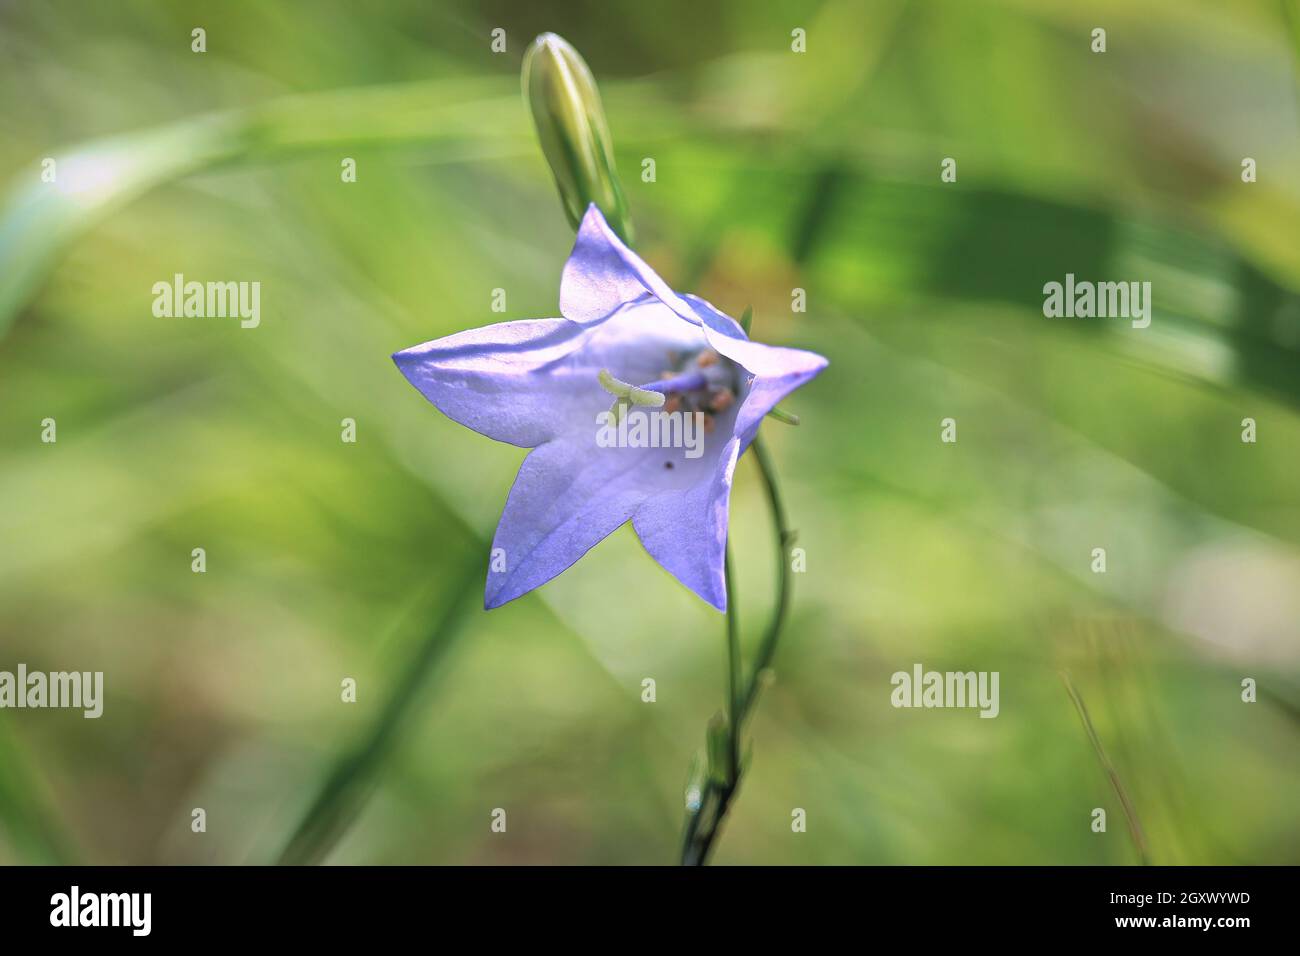 Macro of the star shaped flower on a common harebell. Stock Photo